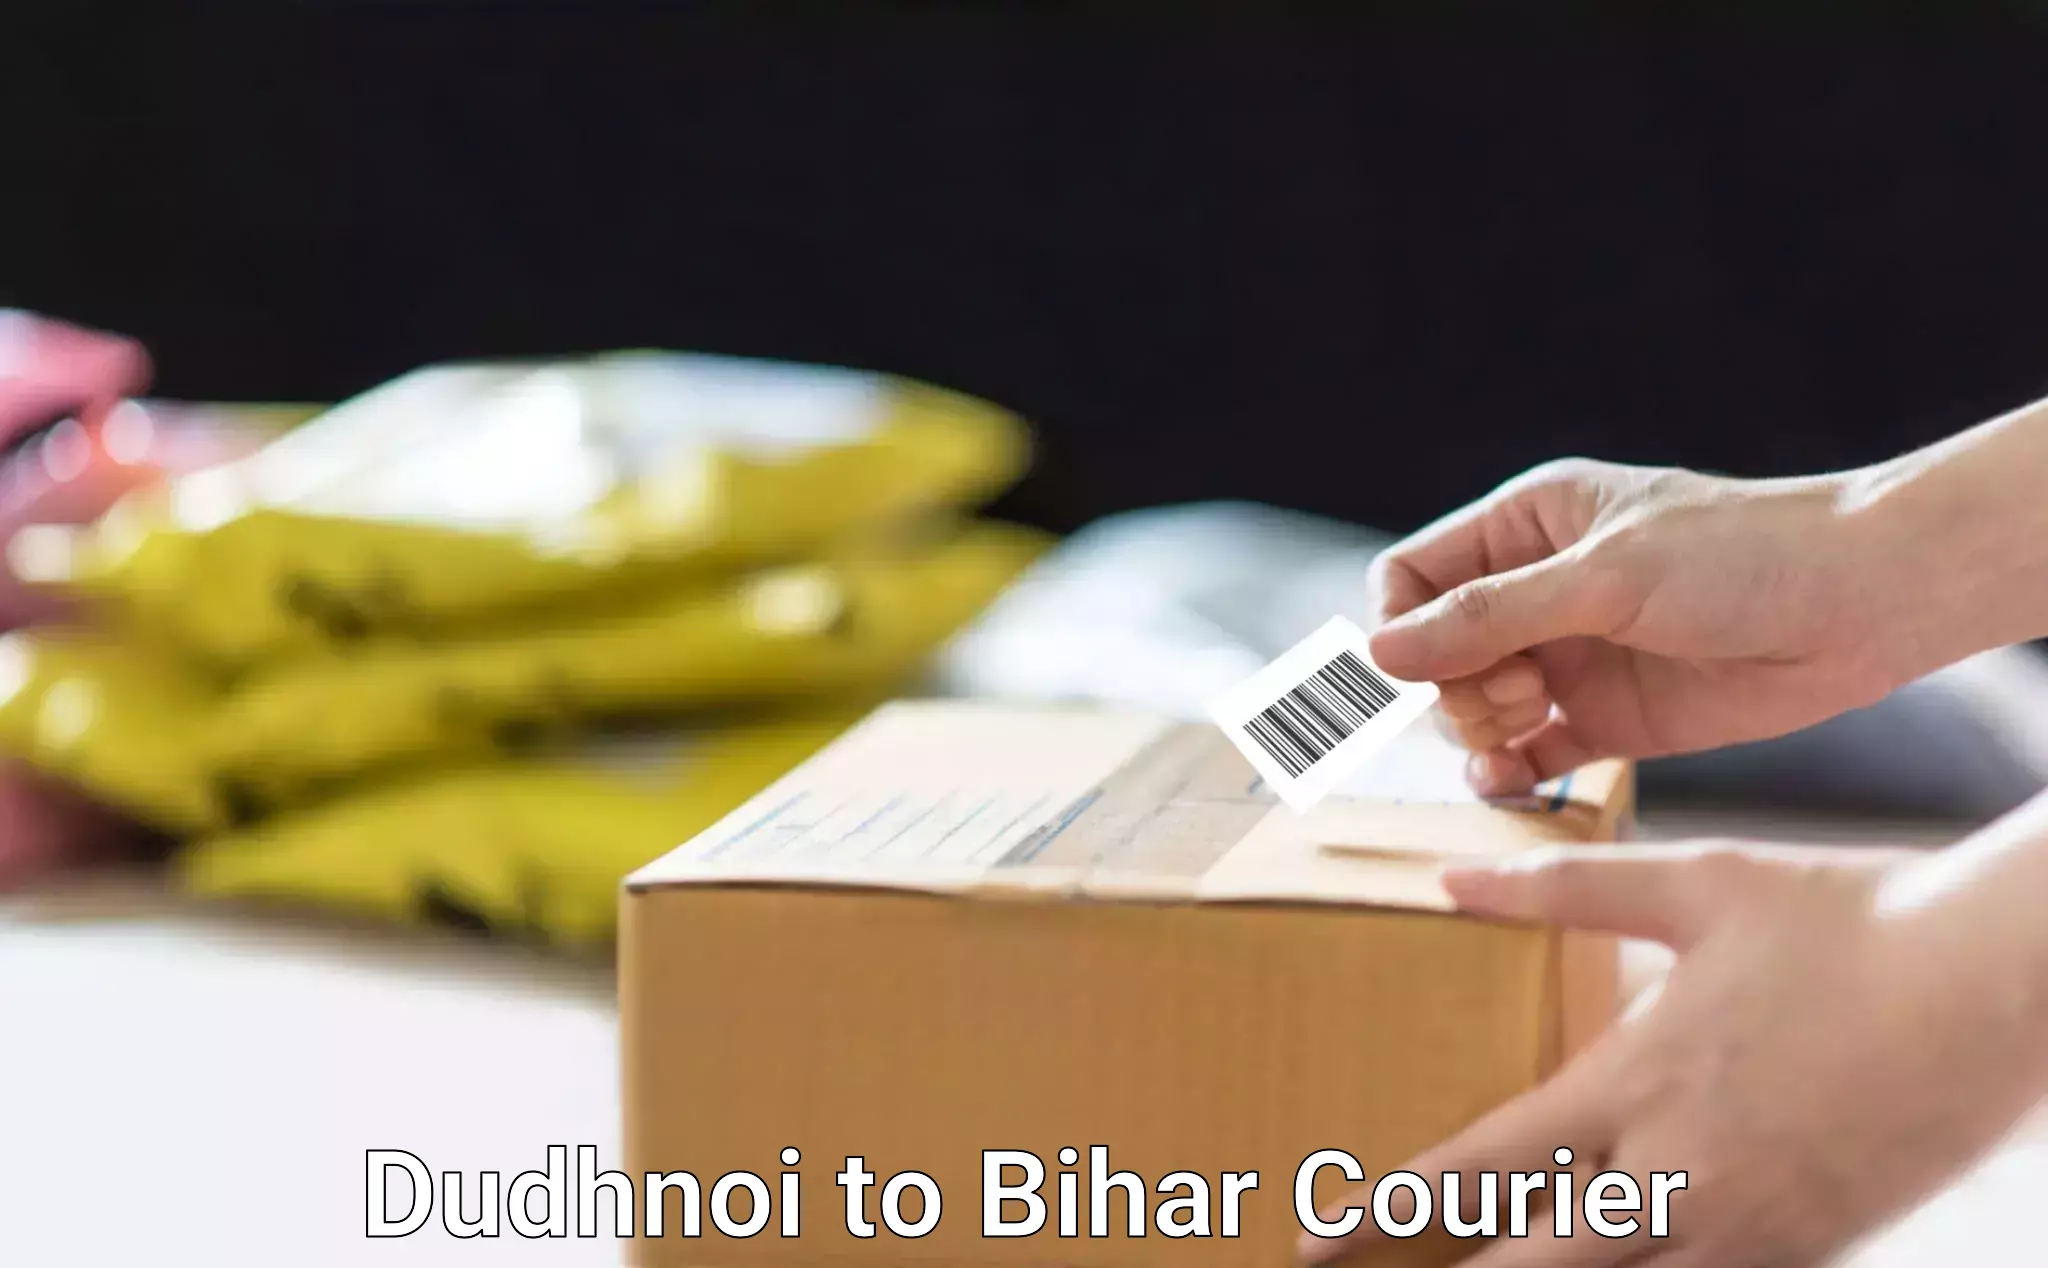 Enhanced delivery experience Dudhnoi to Biraul